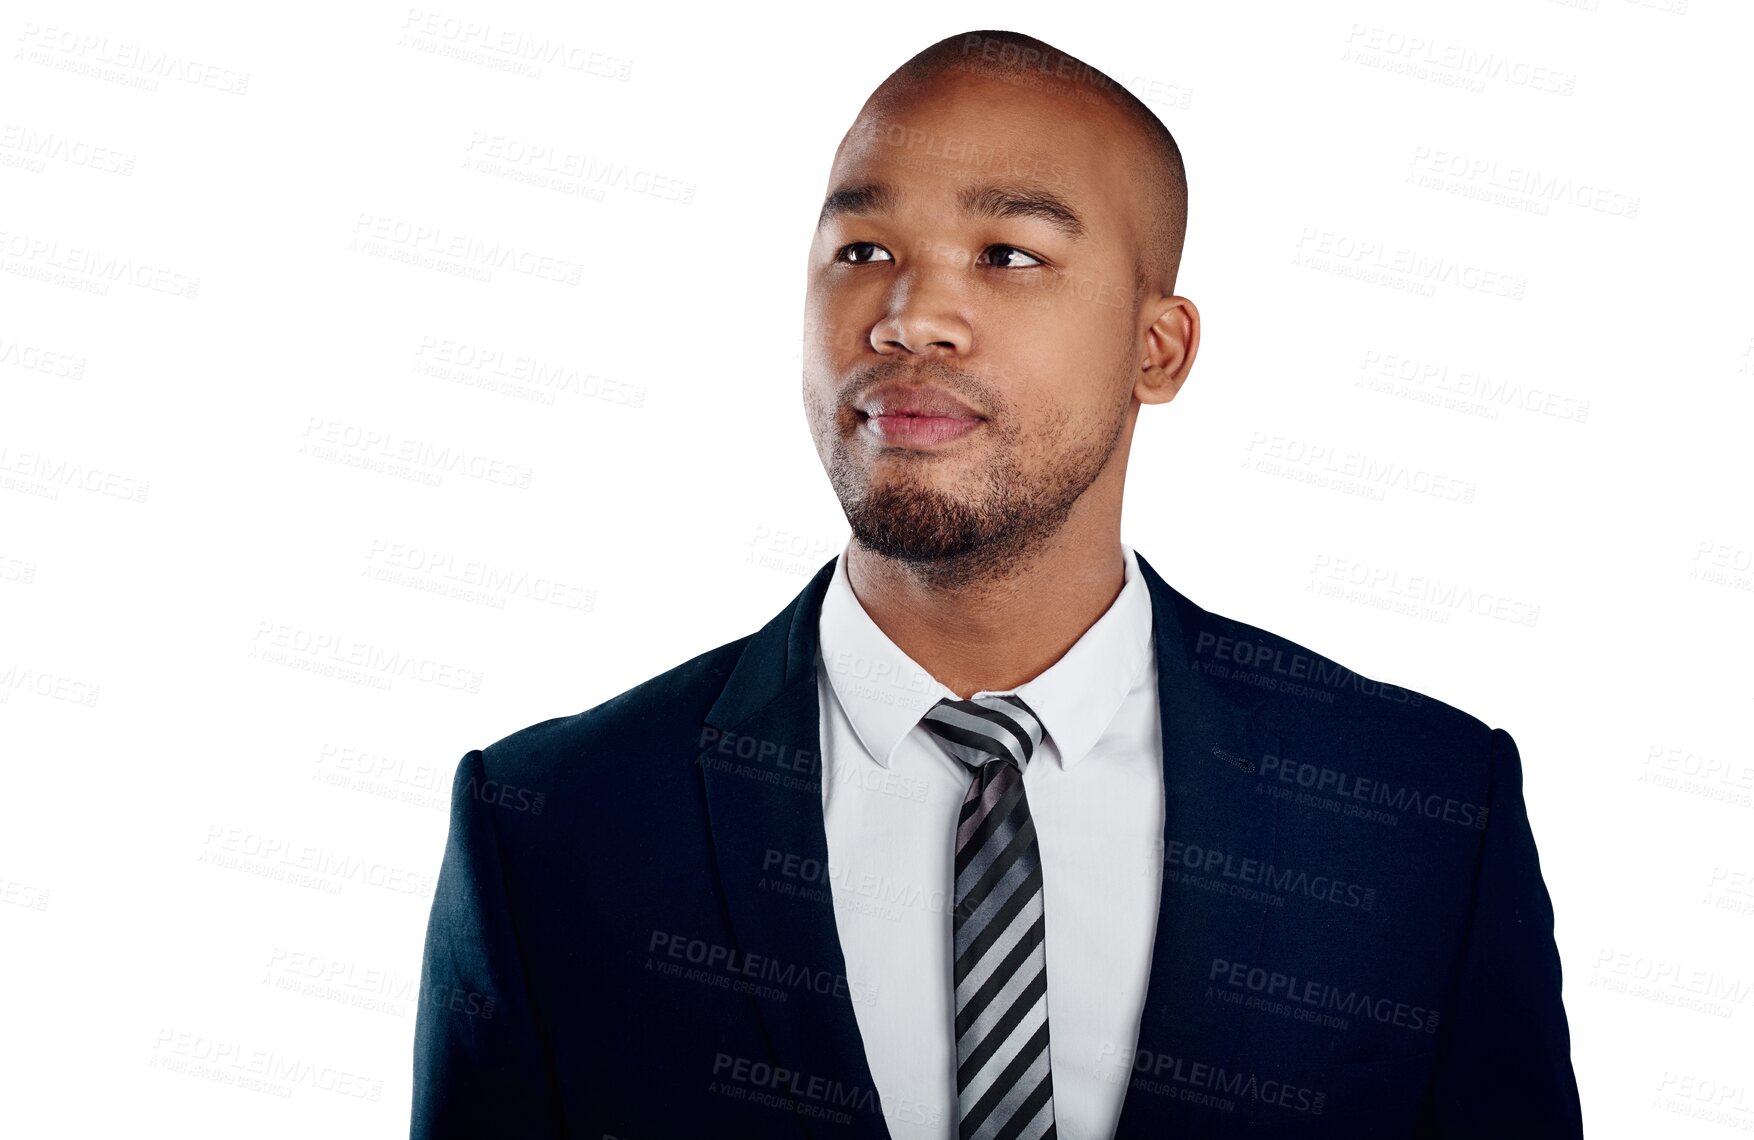 Buy stock photo Serious businessman with confidence, thinking and isolated on transparent png background at law firm. Work, job ideas and face of black man, lawyer or attorney with business, opportunity or career.